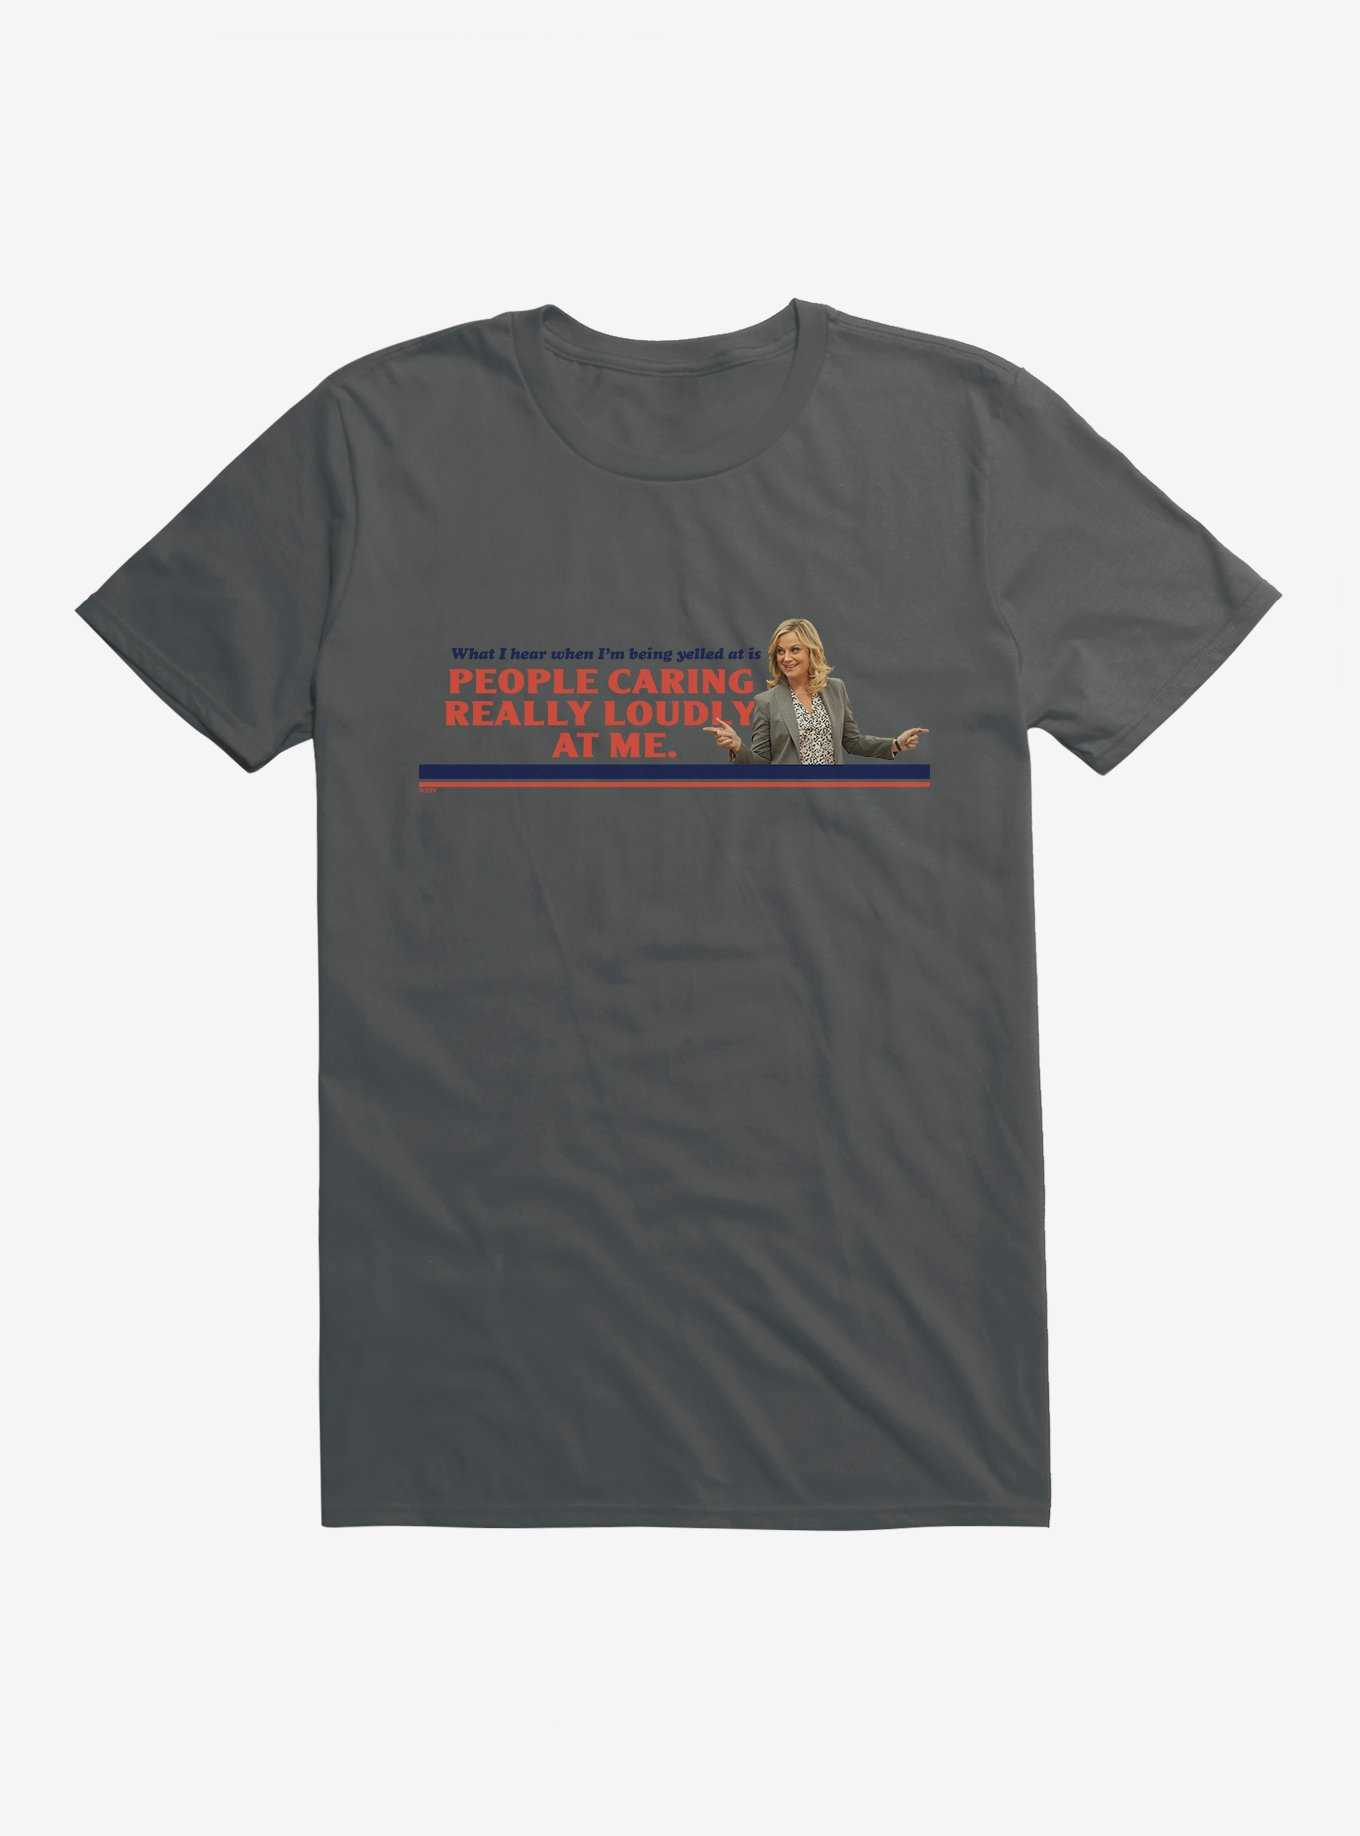 Parks And Recreation People Caring Loudly T-Shirt, , hi-res